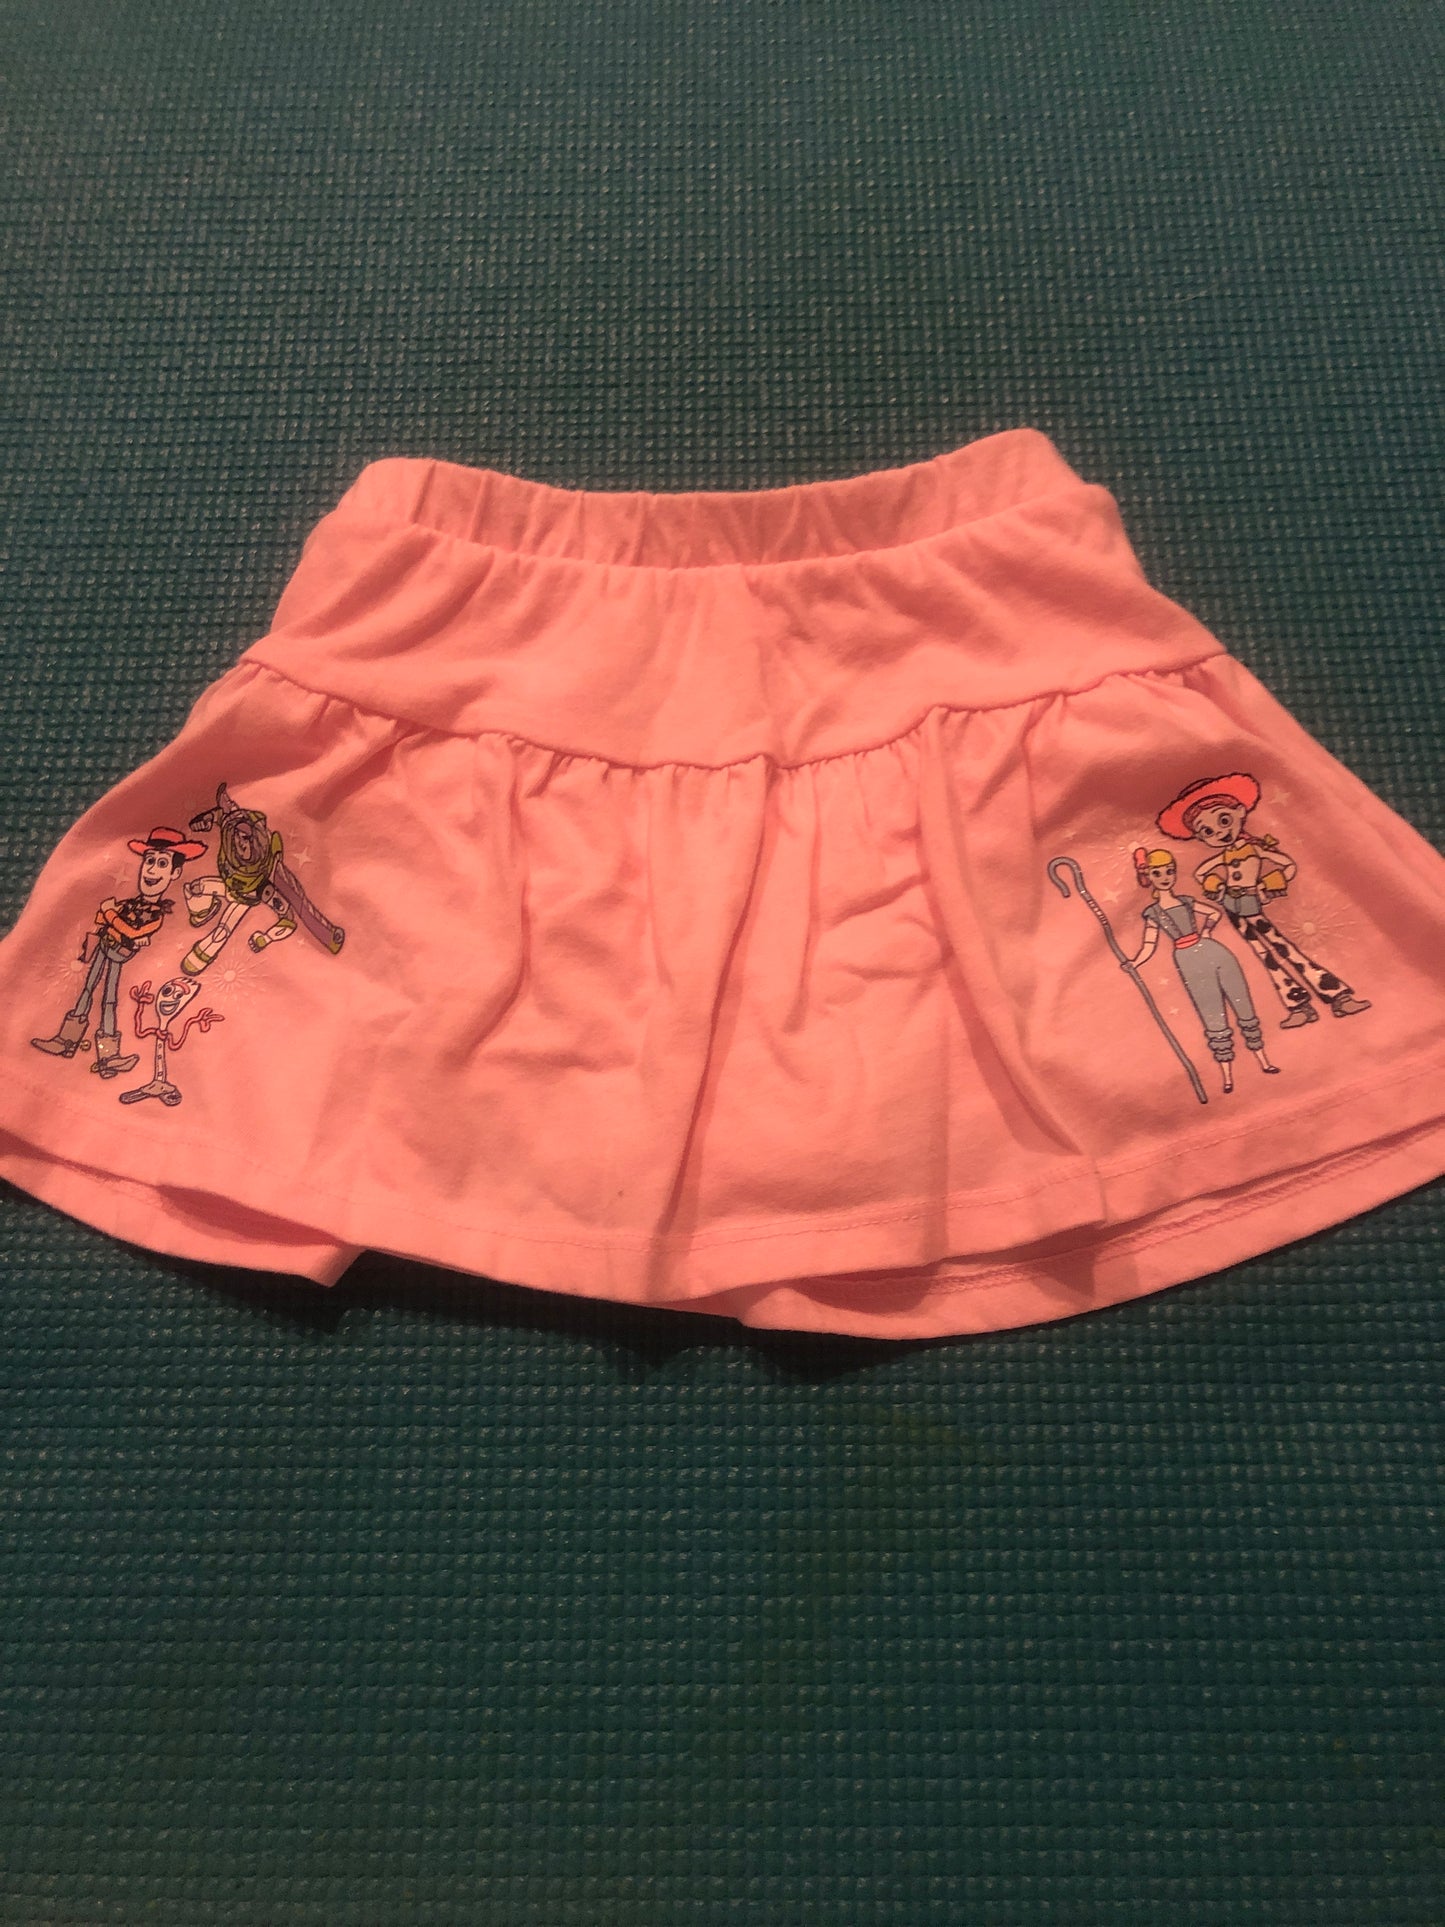 18m Toy Story skirt with bloomers